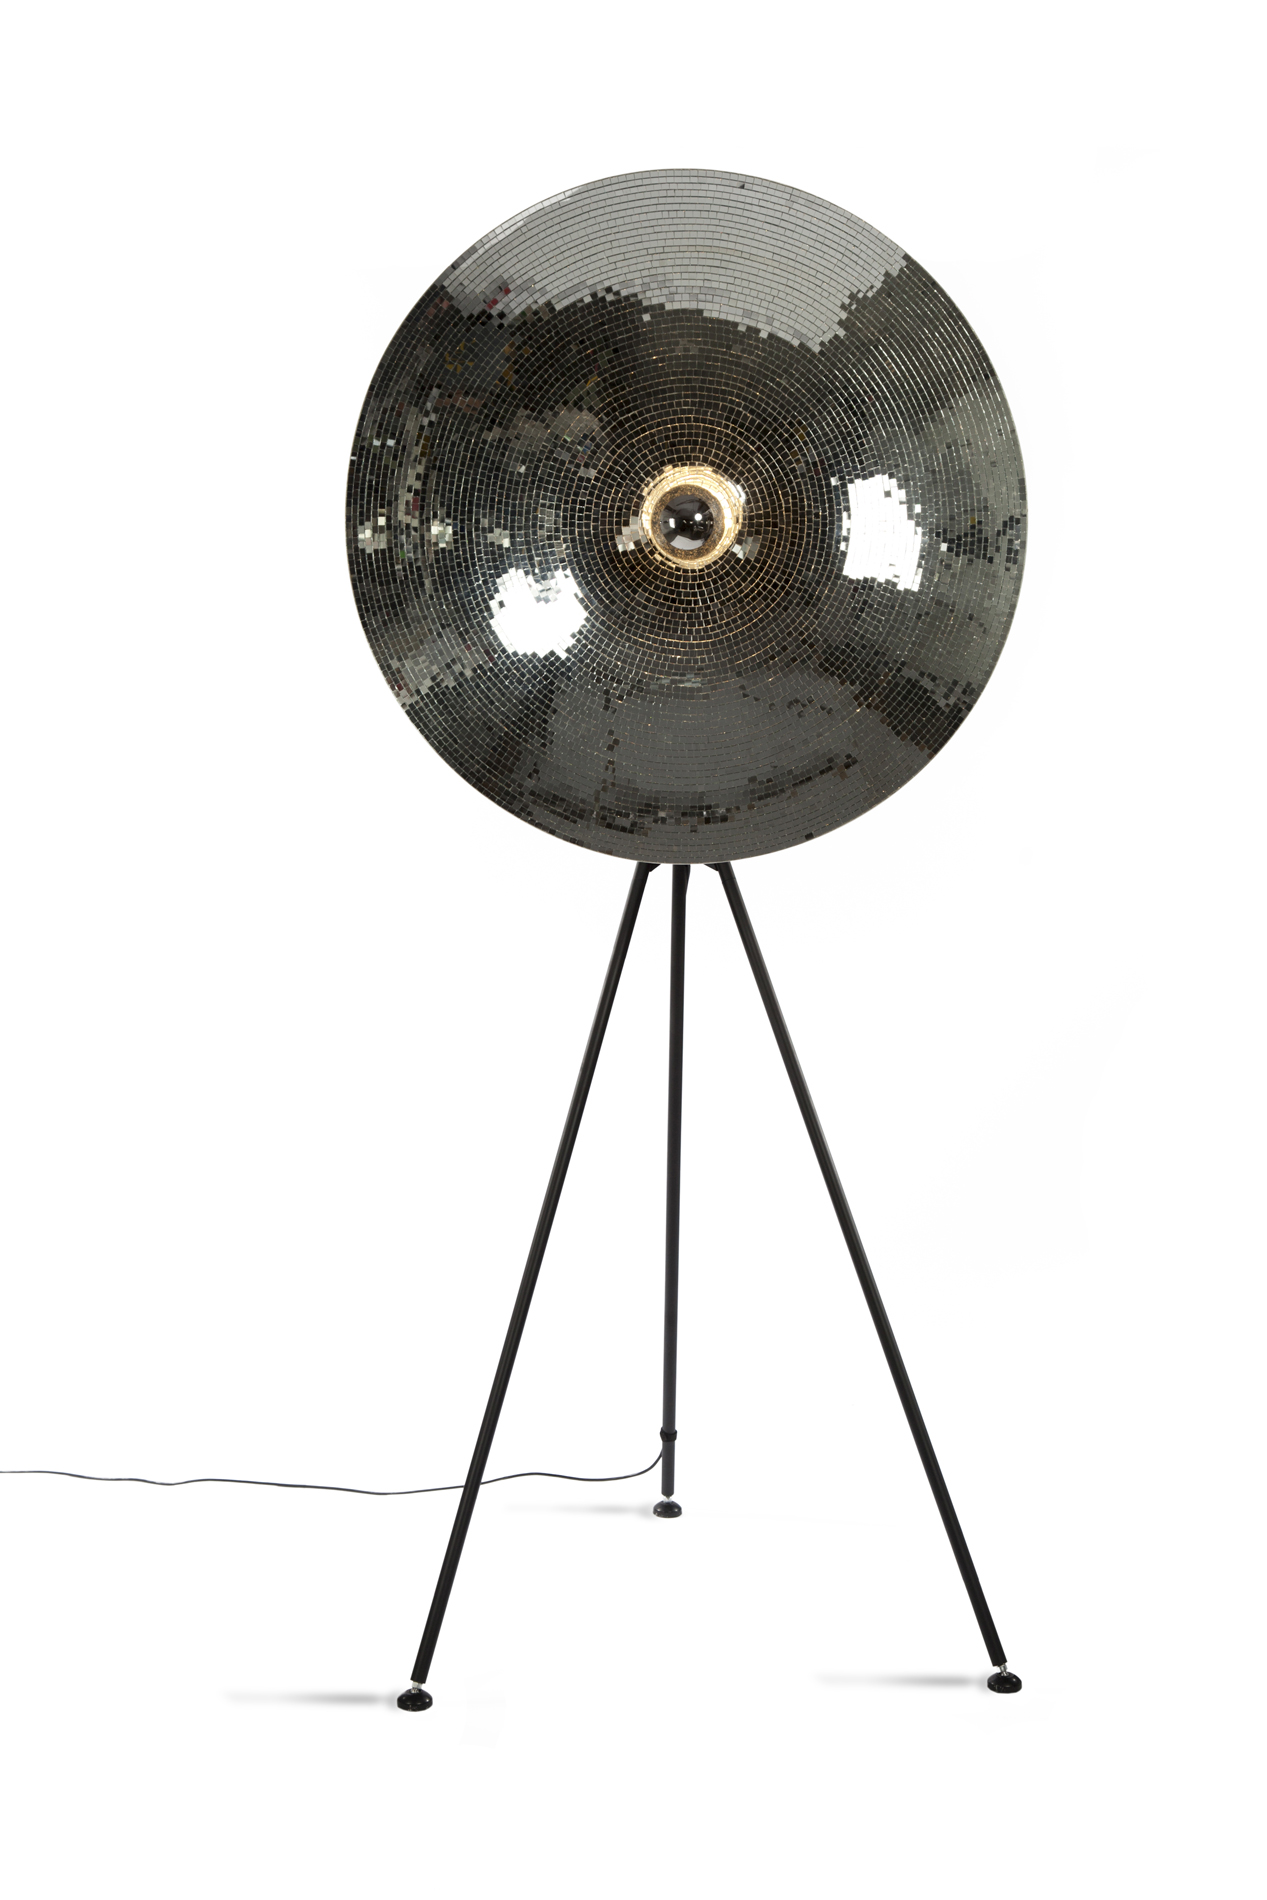 This Disco Ball Floor Lamp Is A Classy Take On A Kitschy Icon